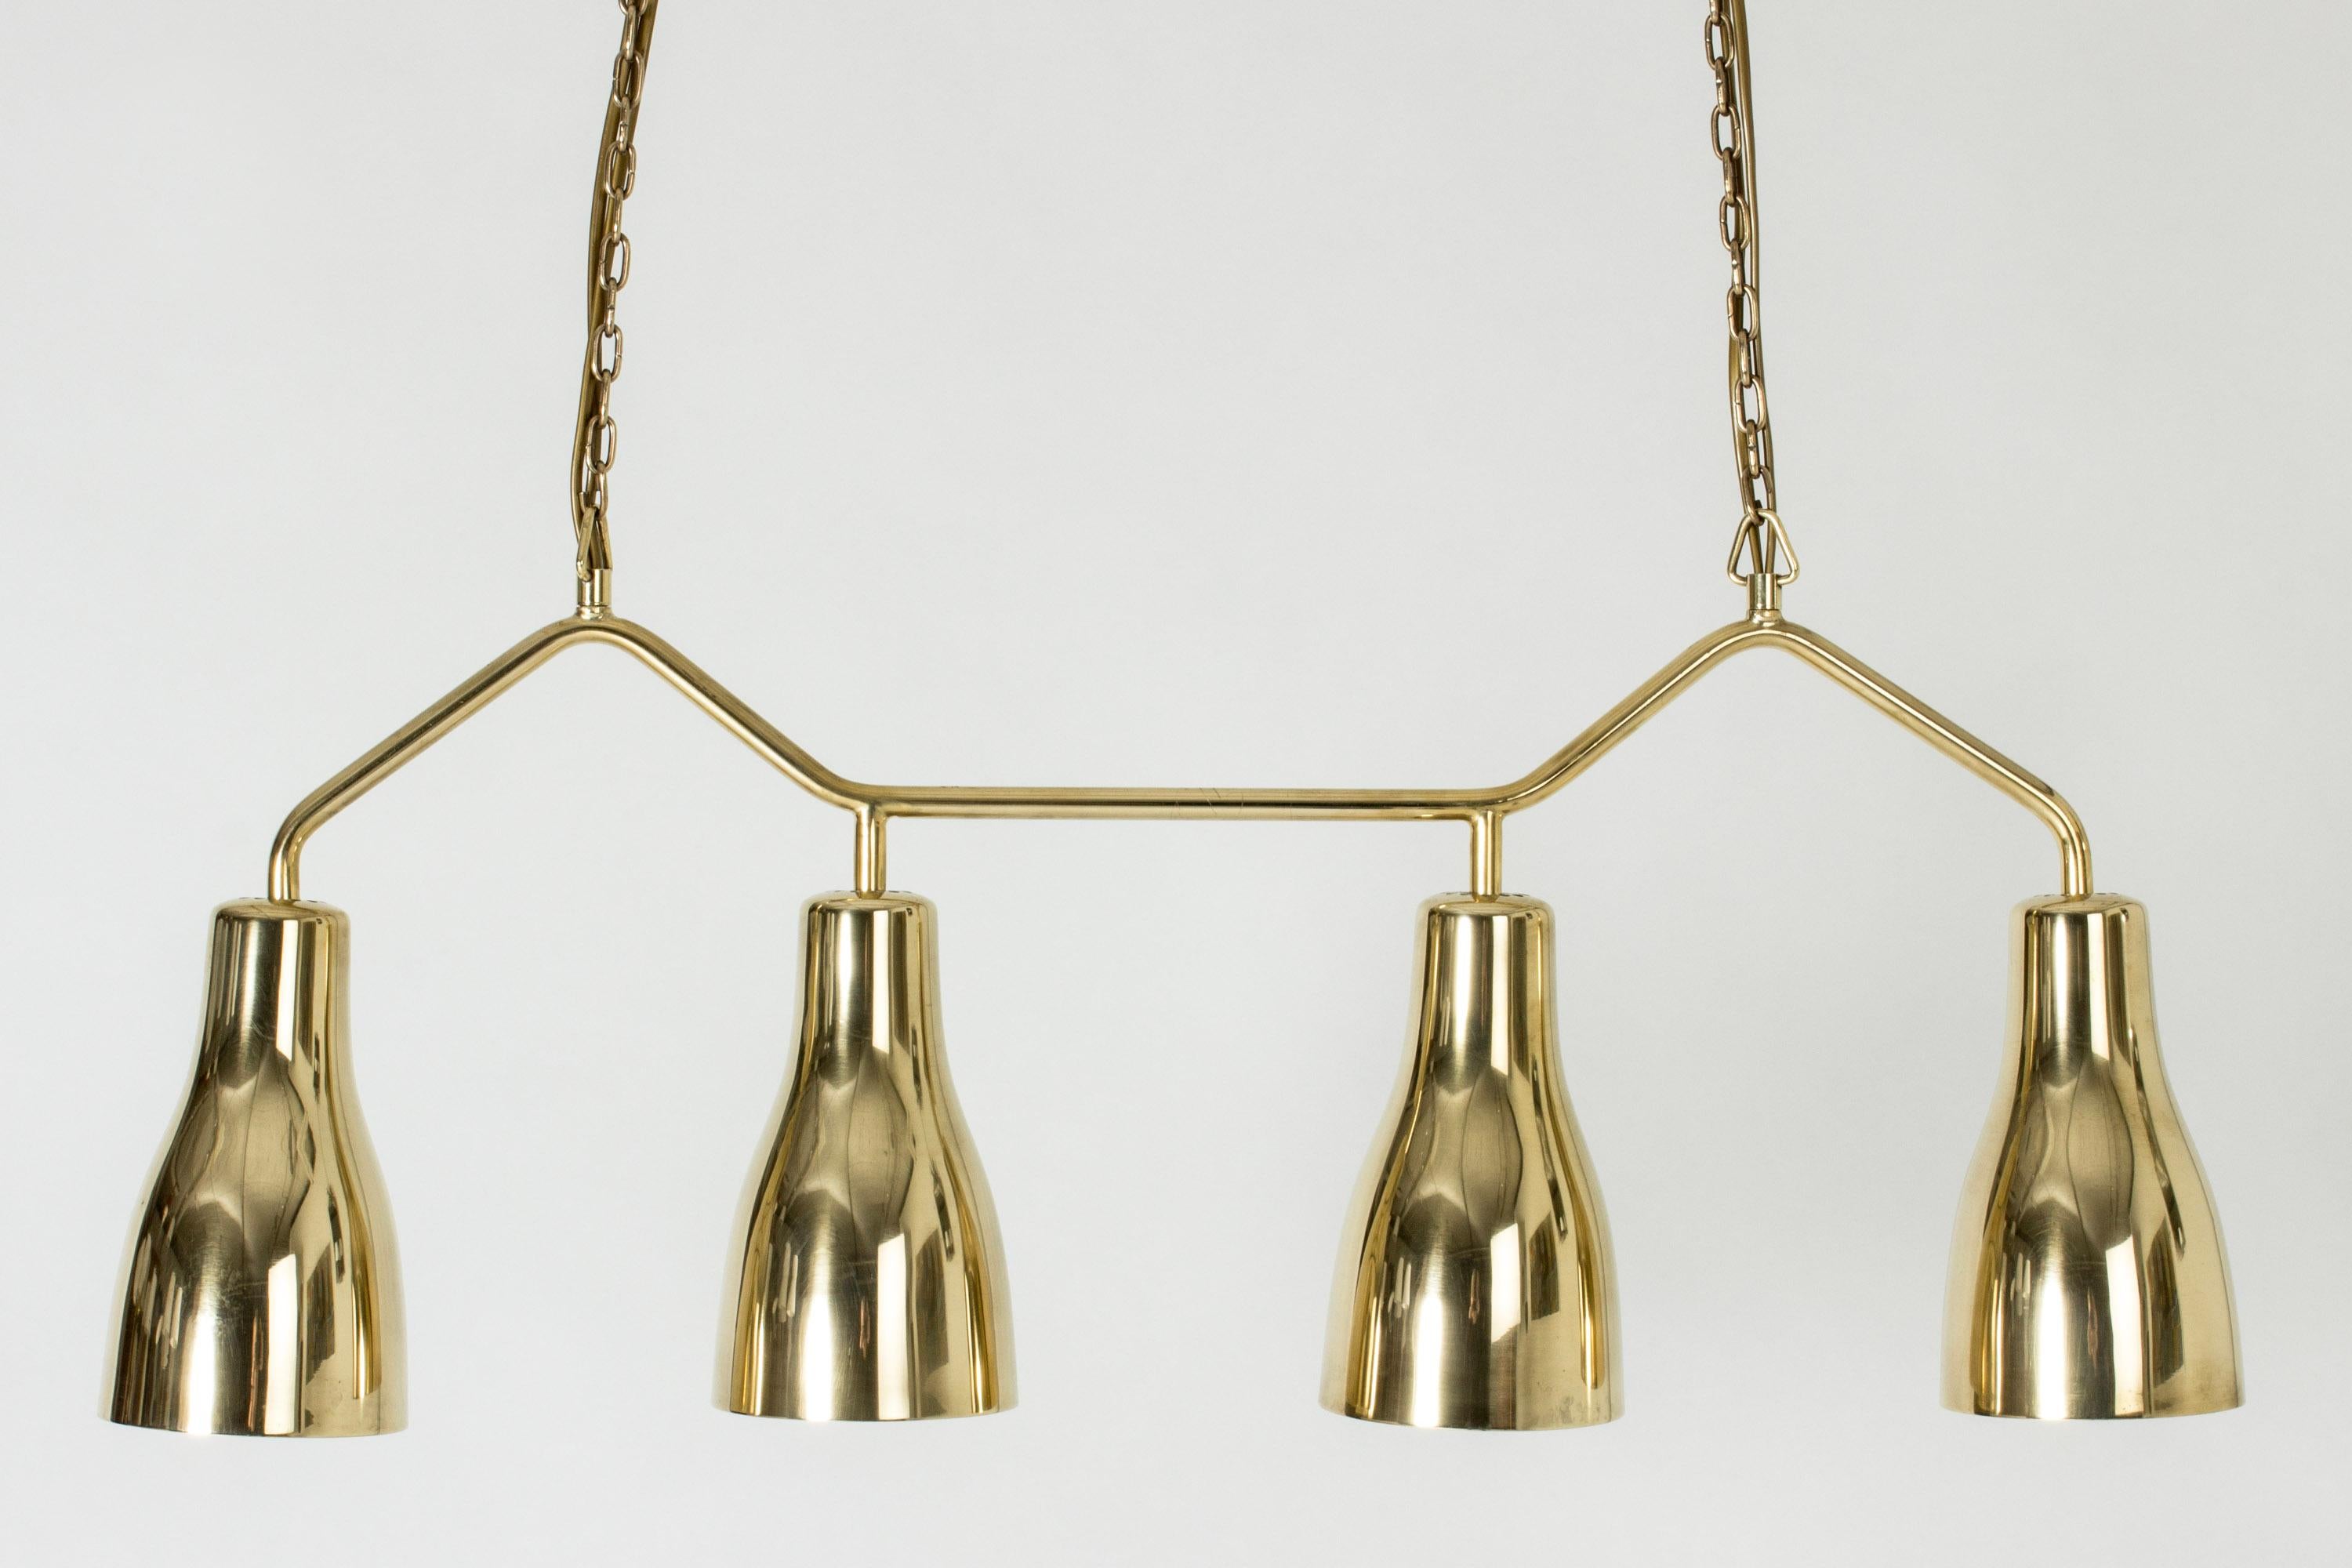 Brass chandelier by Hans Bergström, in a sleek design with four aligned lamp shades. Suspended on a chain that is adjustable in length, up to 187 cm. The light is perfect for a kitchen bar counter or similar.

Hans Bergström was the owner and